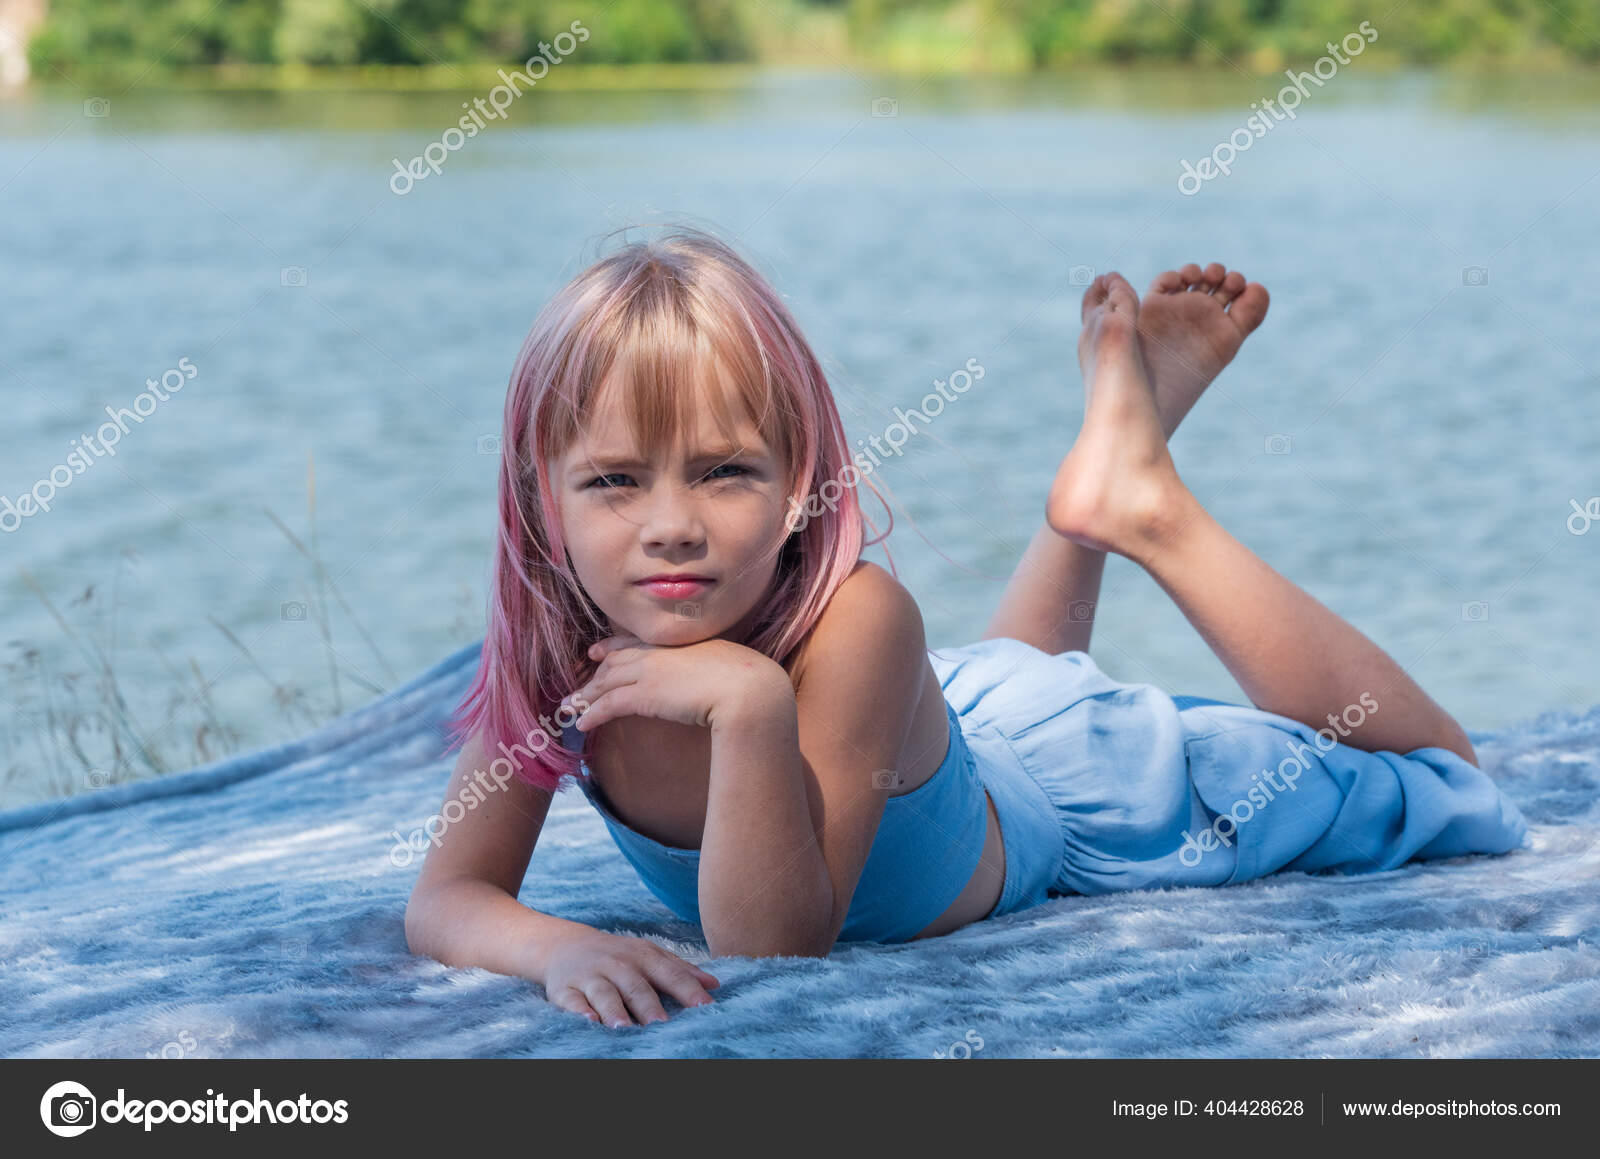 Portrait of a Cute 8 Year Old Girl Stock Image - Image of portrait, cute:  49996809